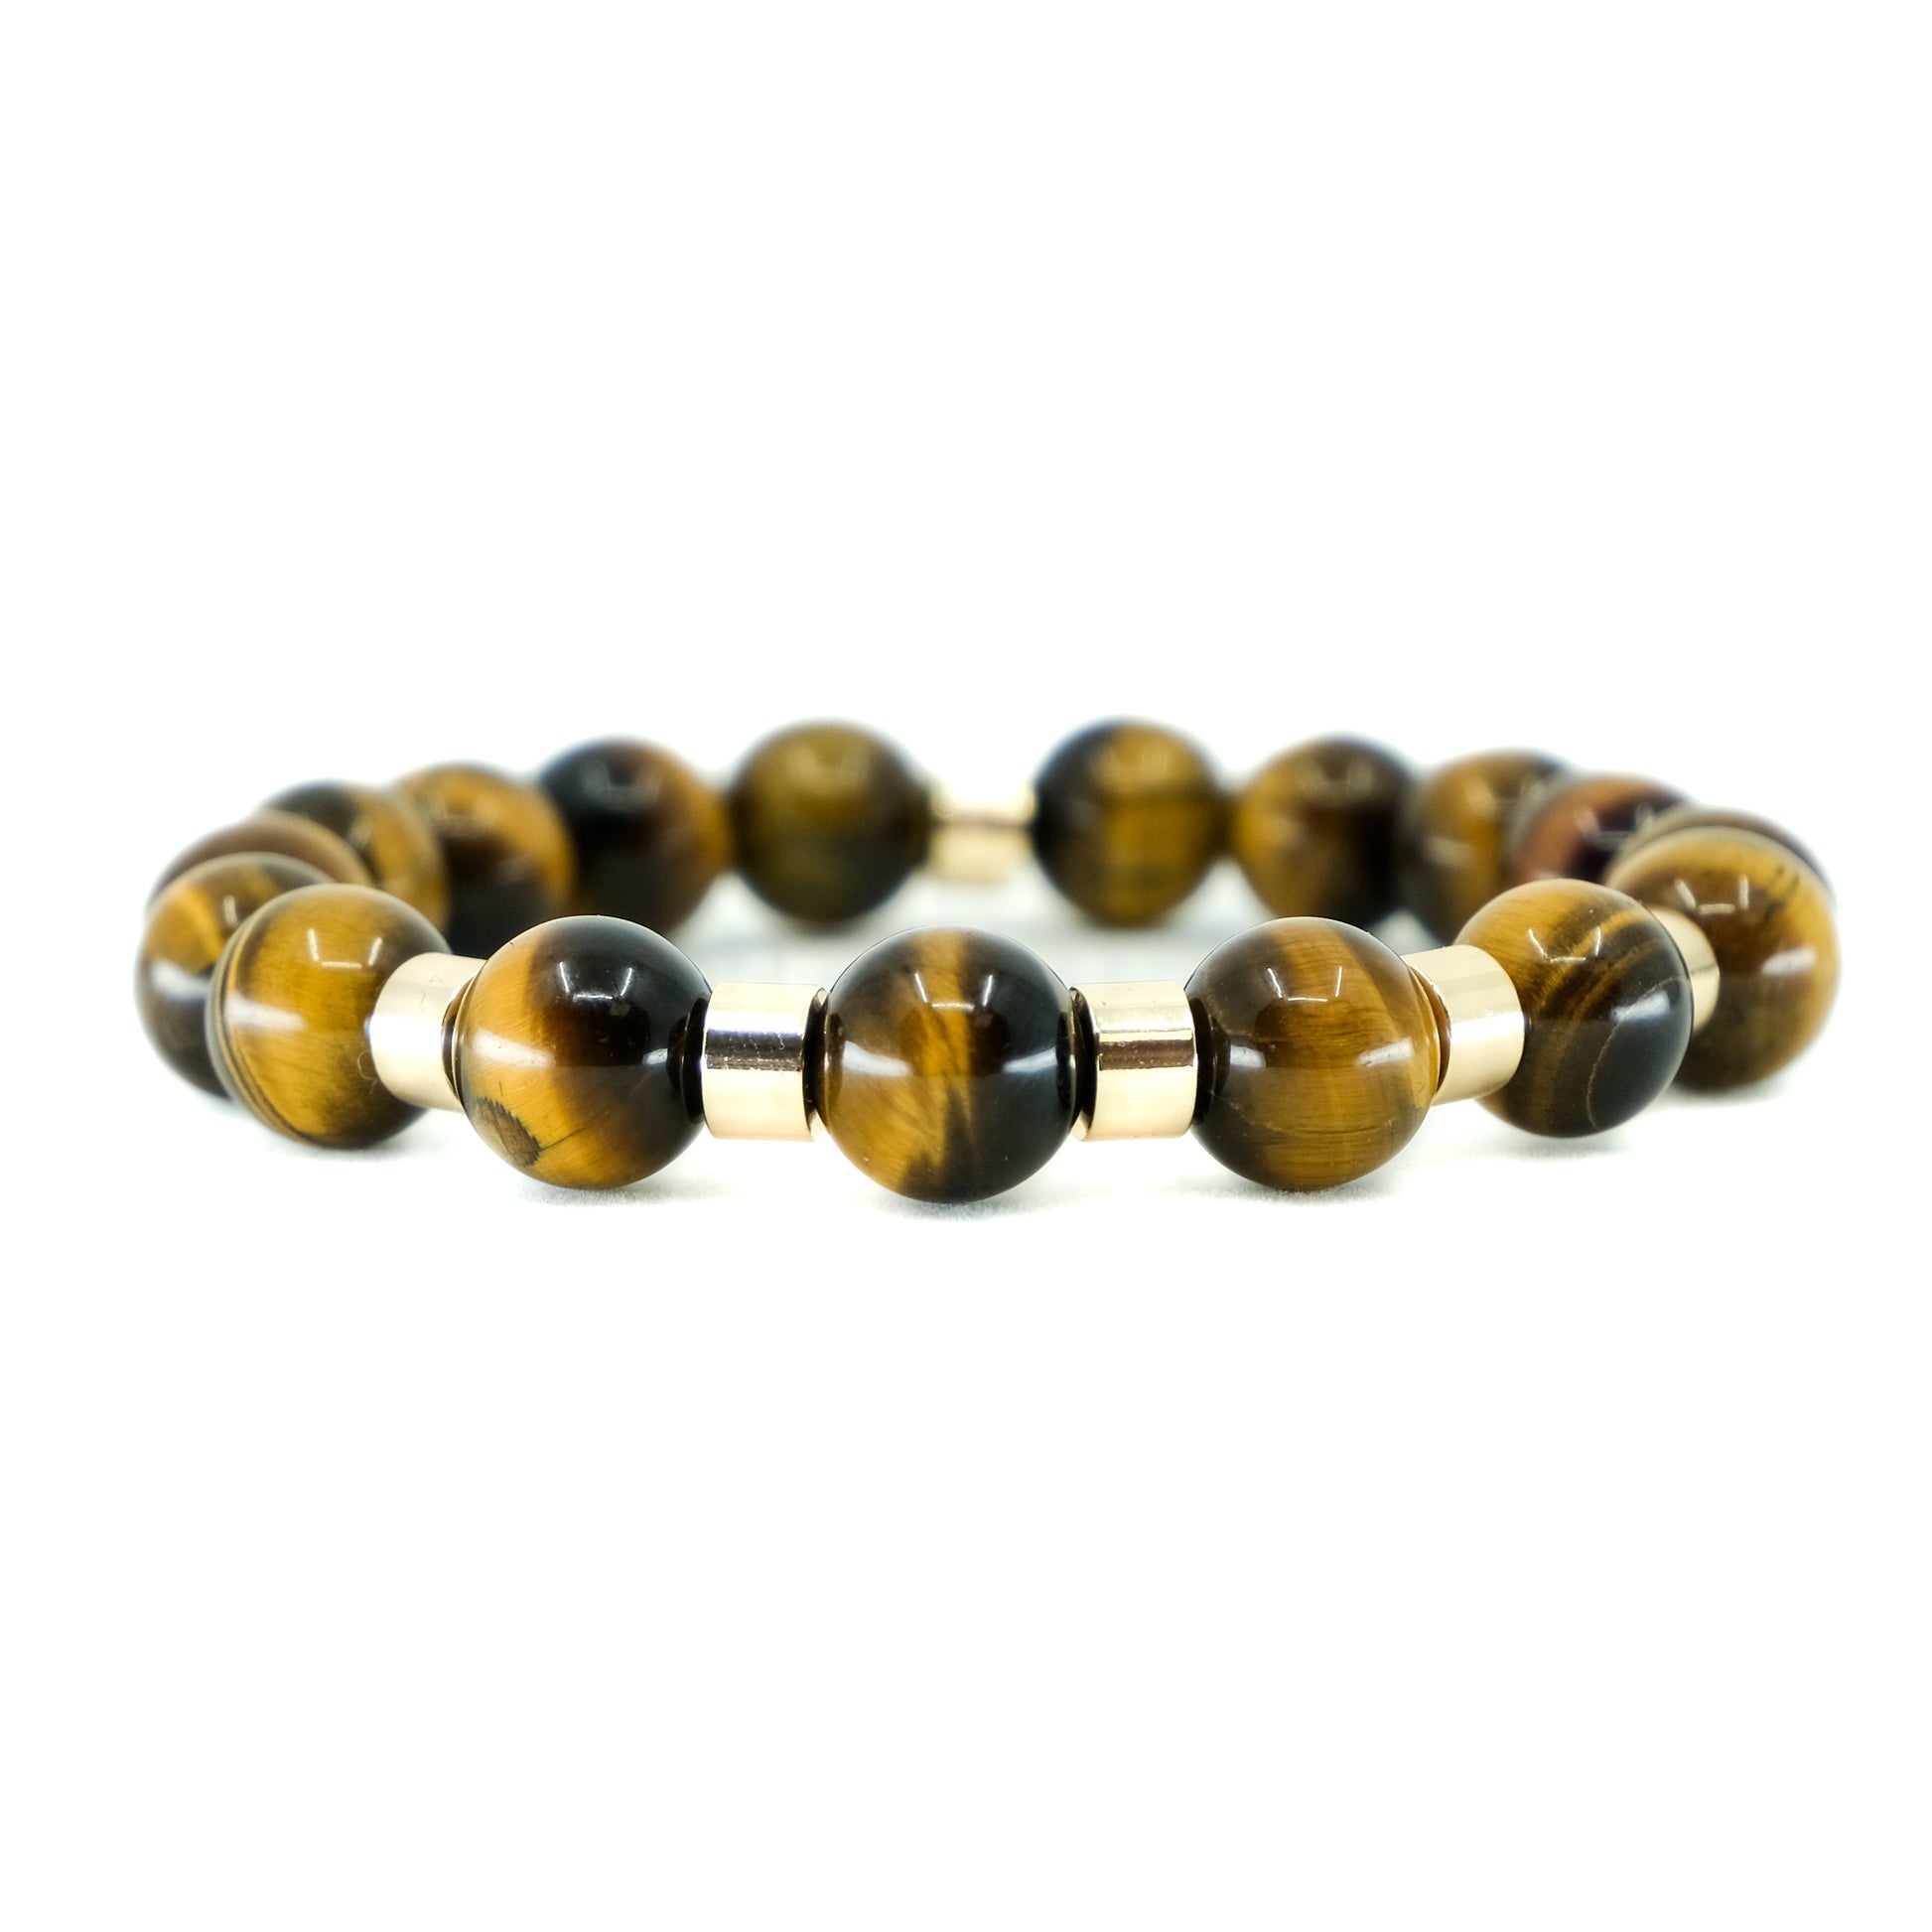 A Tiger Eye gemstone bracelet in 10mm beads with gold accessories